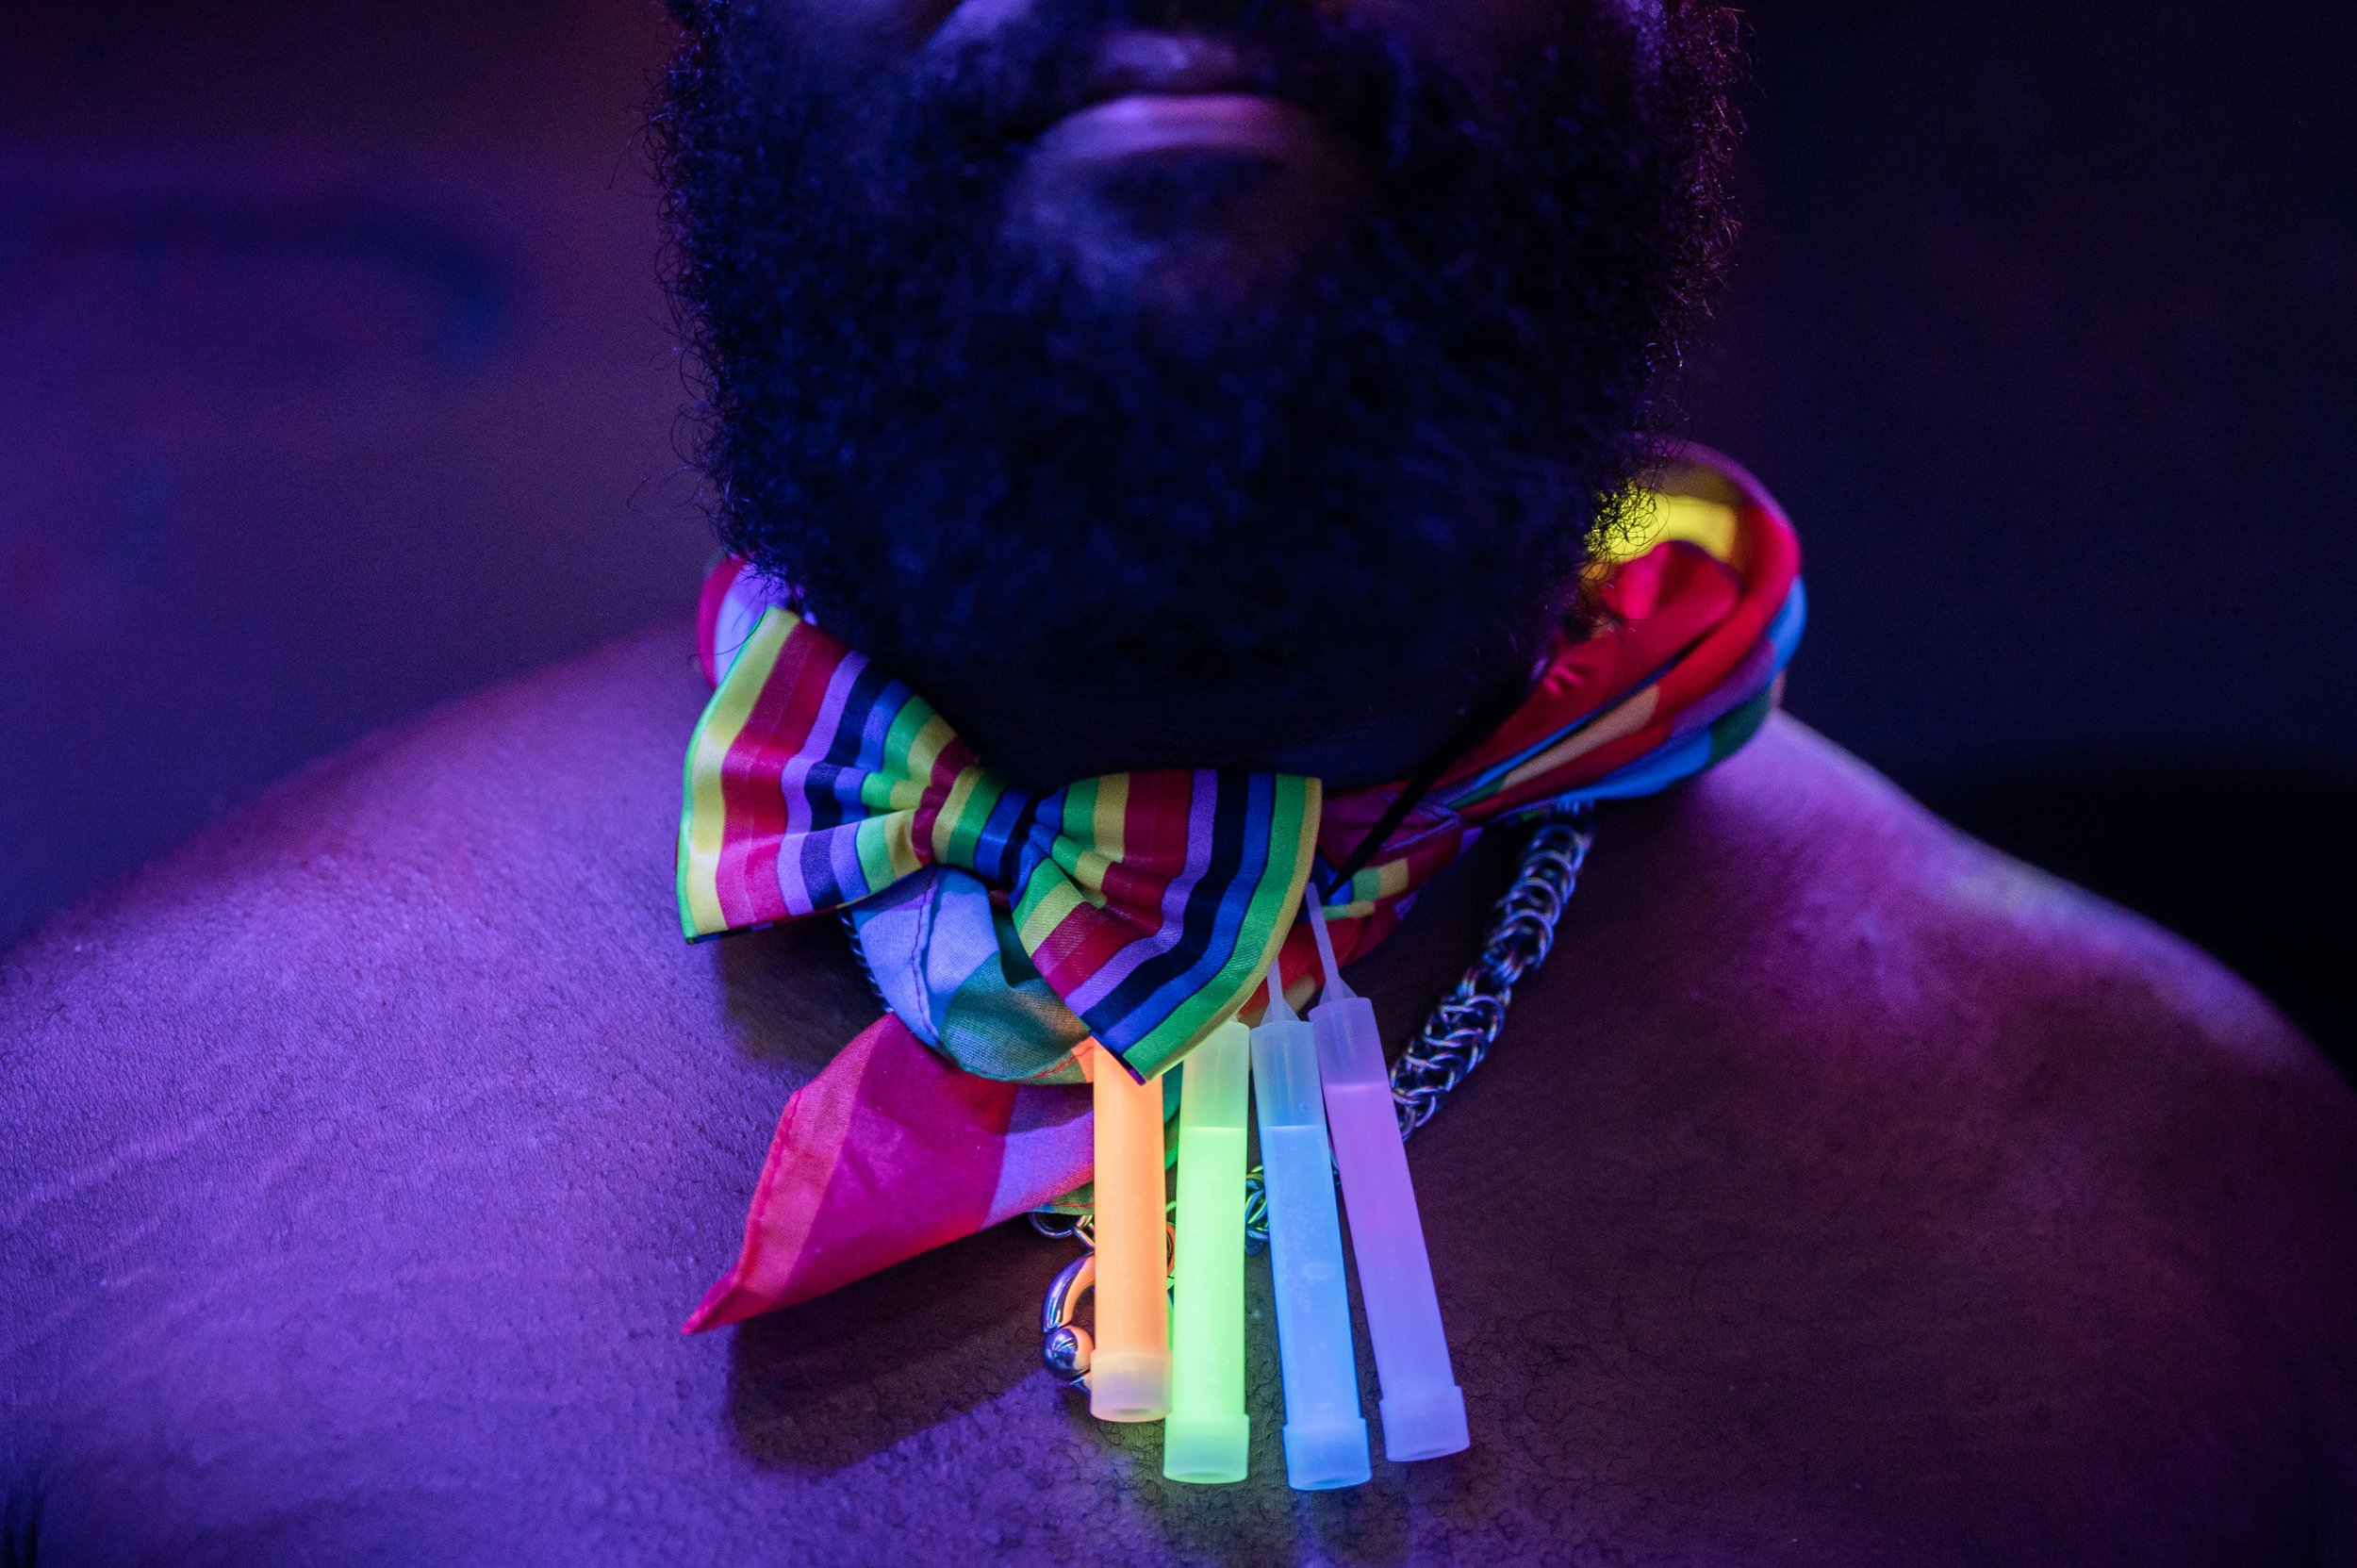  Moe Hayward poses with accessories during a Neon Bear Glow Party at MJ’s Tavern in Norfolk, Va. on Saturday, June 17, 2023. The Virginia Bear Contest auctioned off a crocheted bear at the Glow Party, with all proceeds donated to the LGBT Life Center